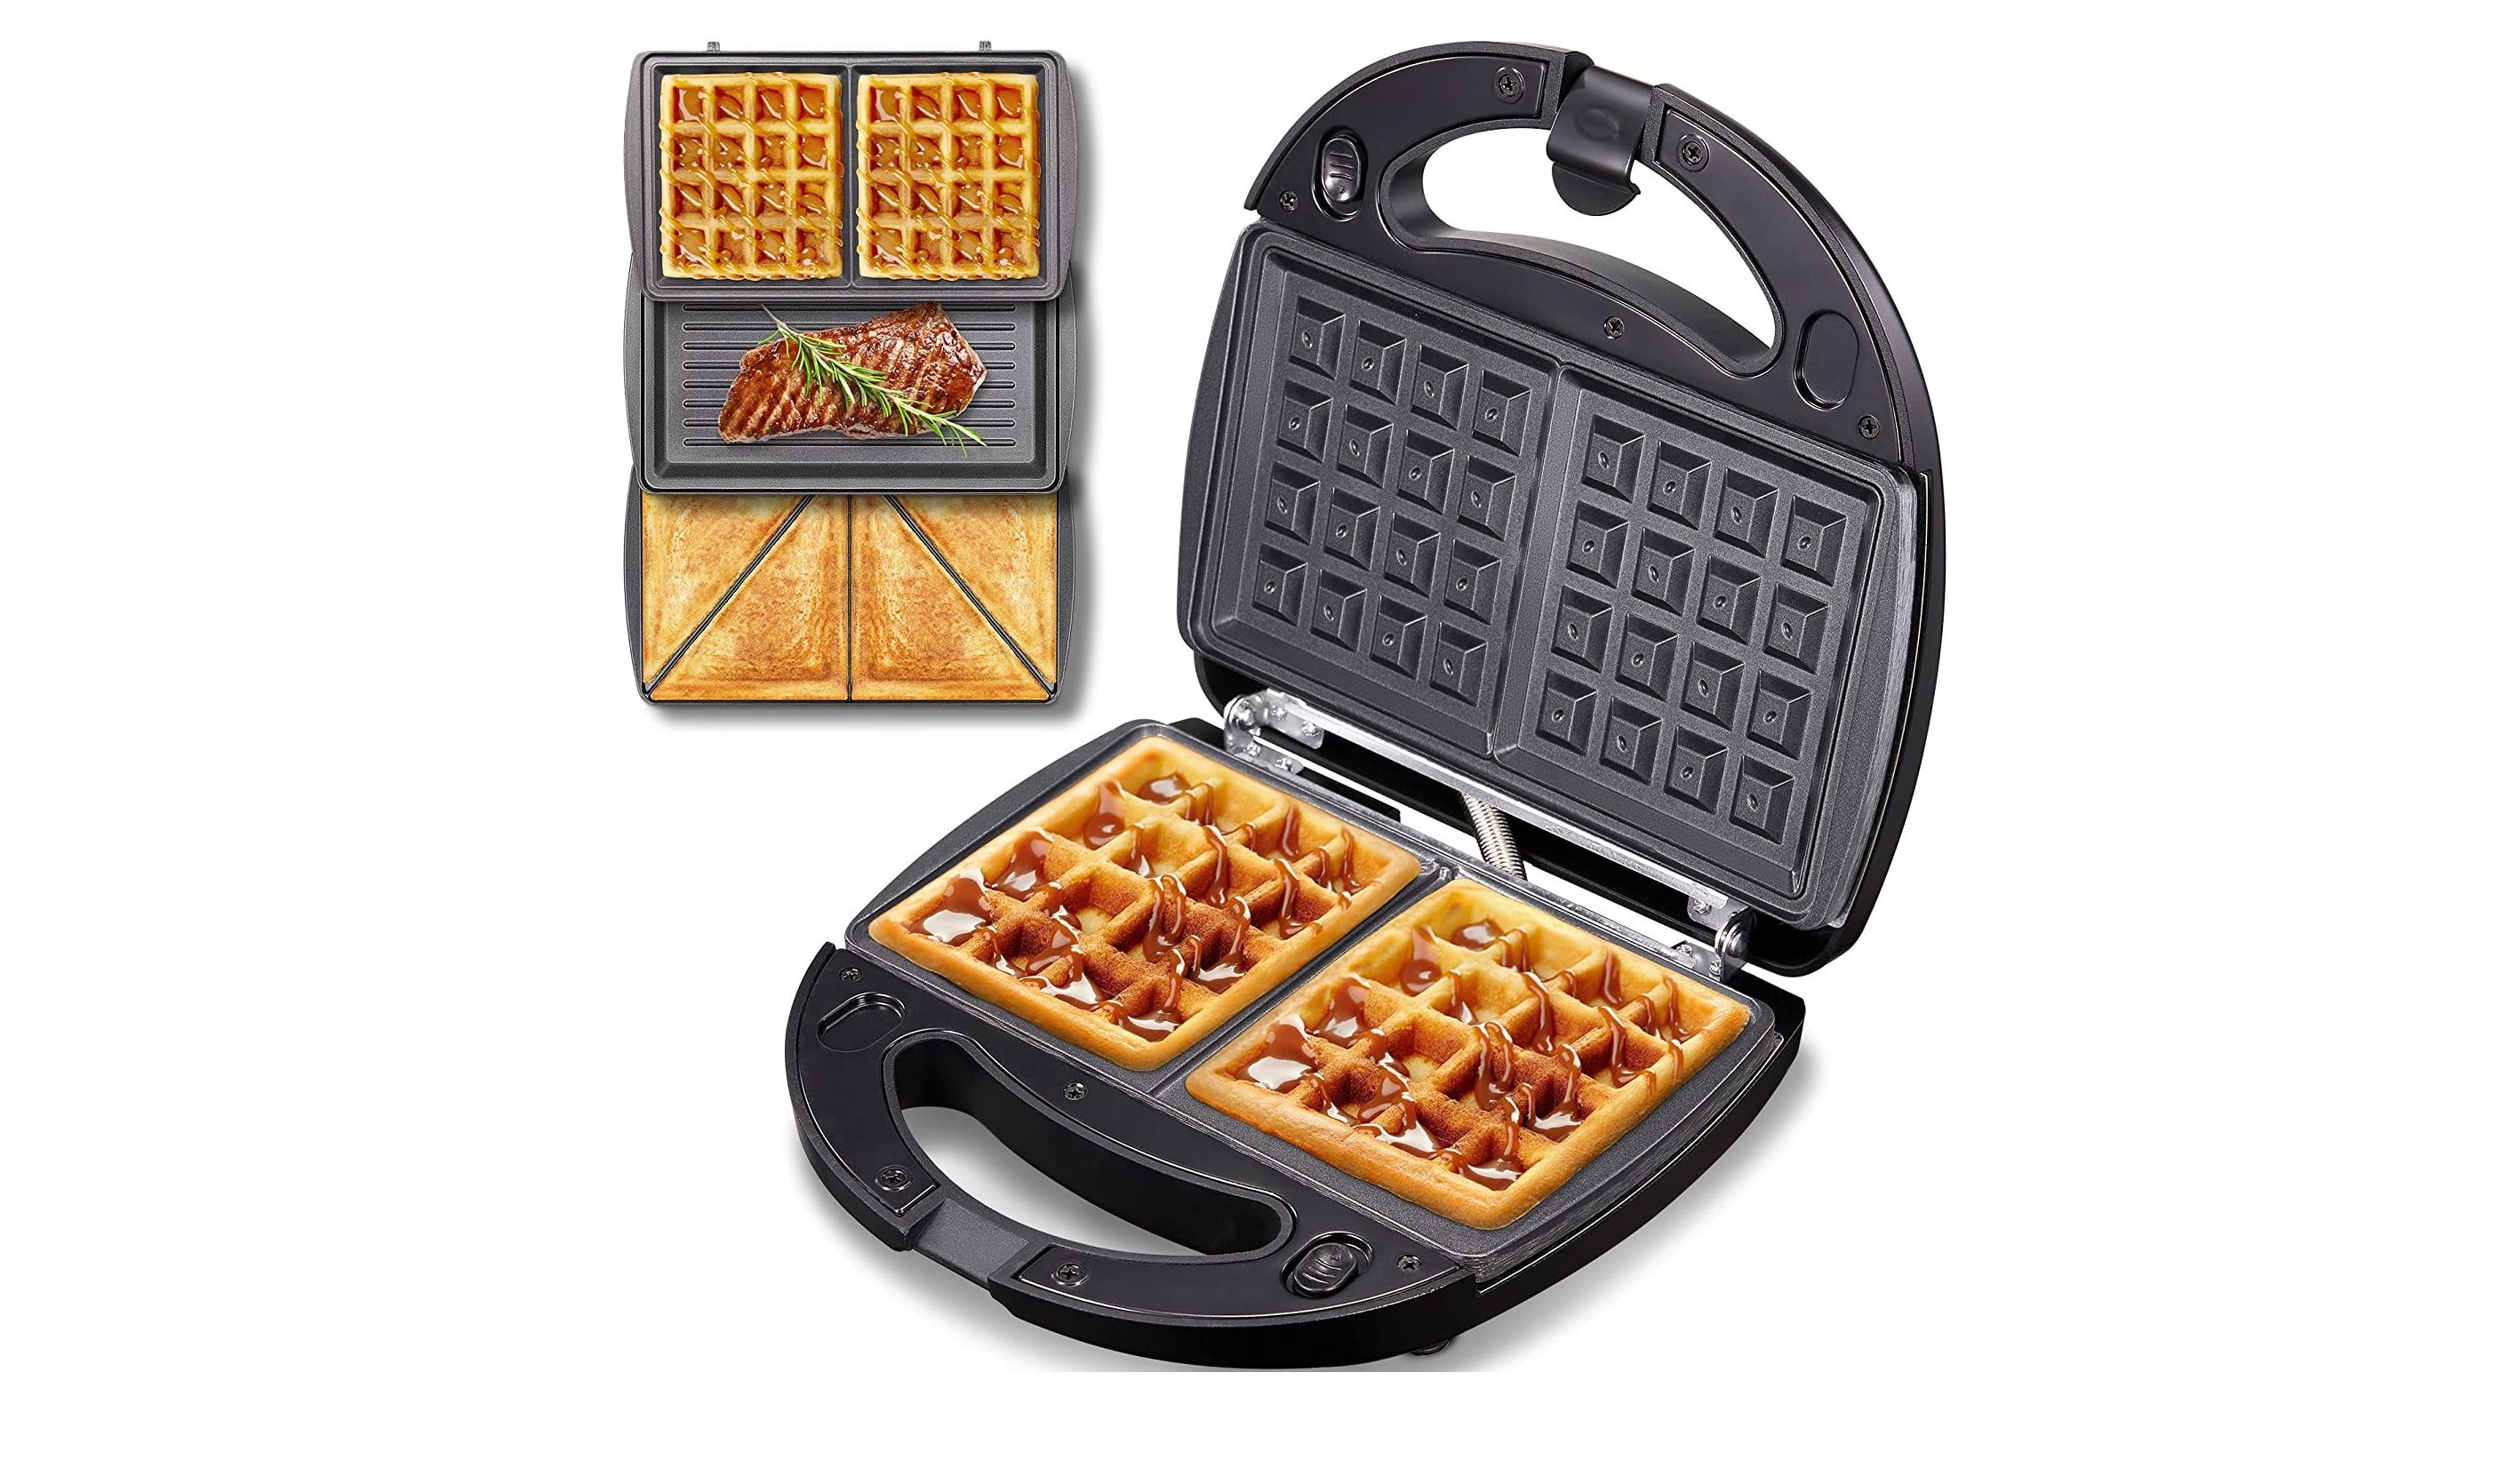 waffles being cooked in the yabano 3-in-1 sandwich maker